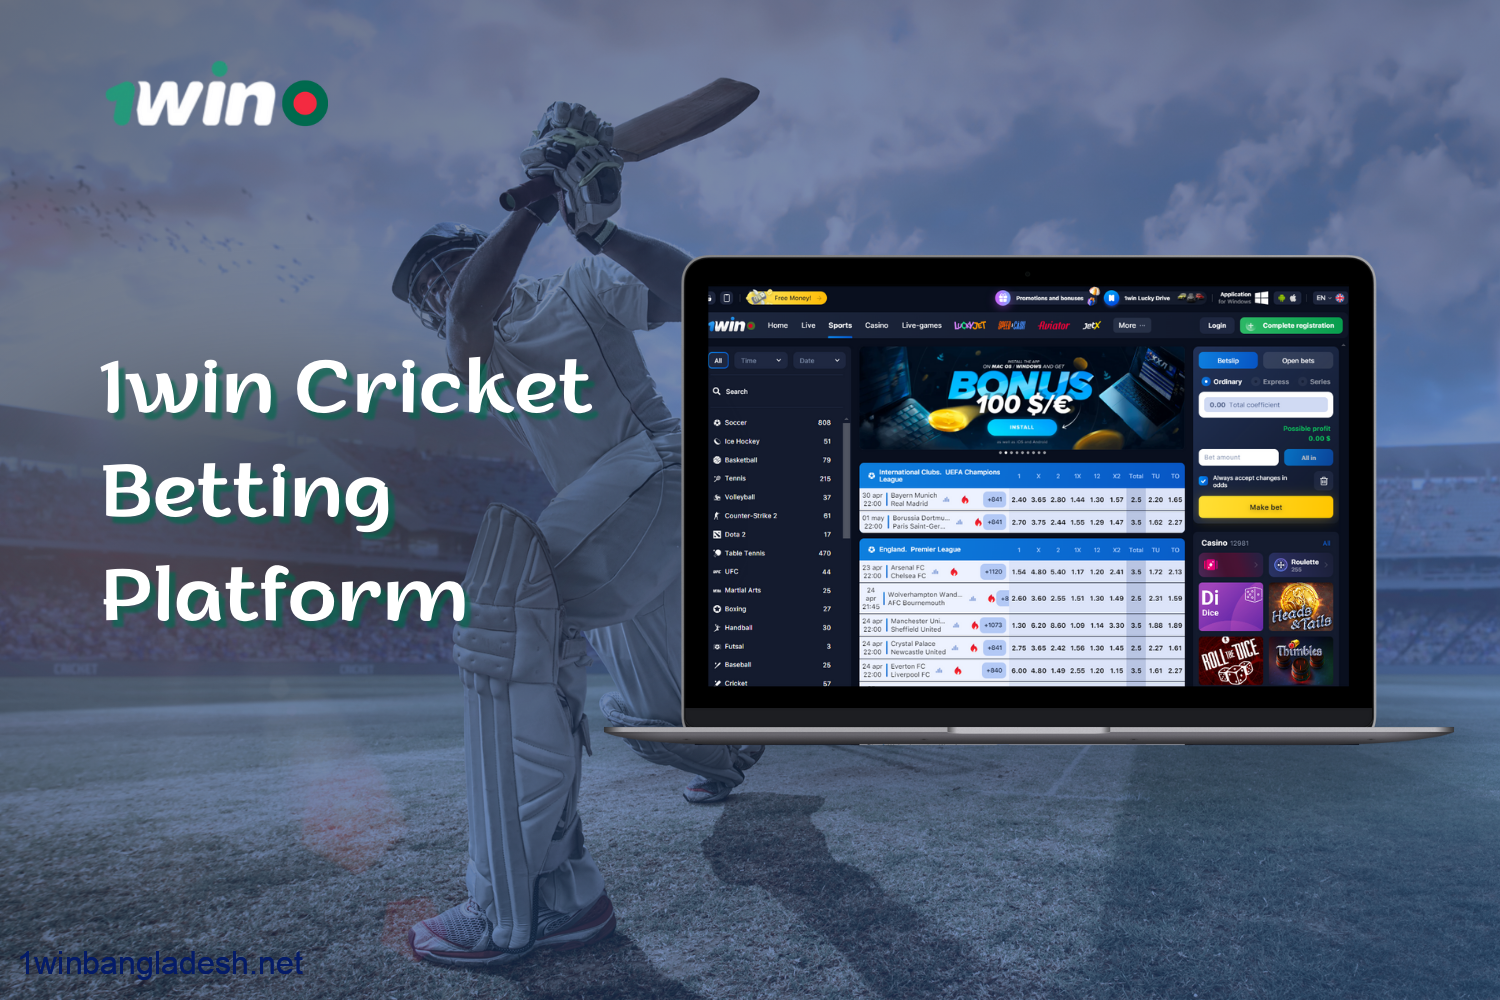 1win cricket betting platform for fans from Bangladesh